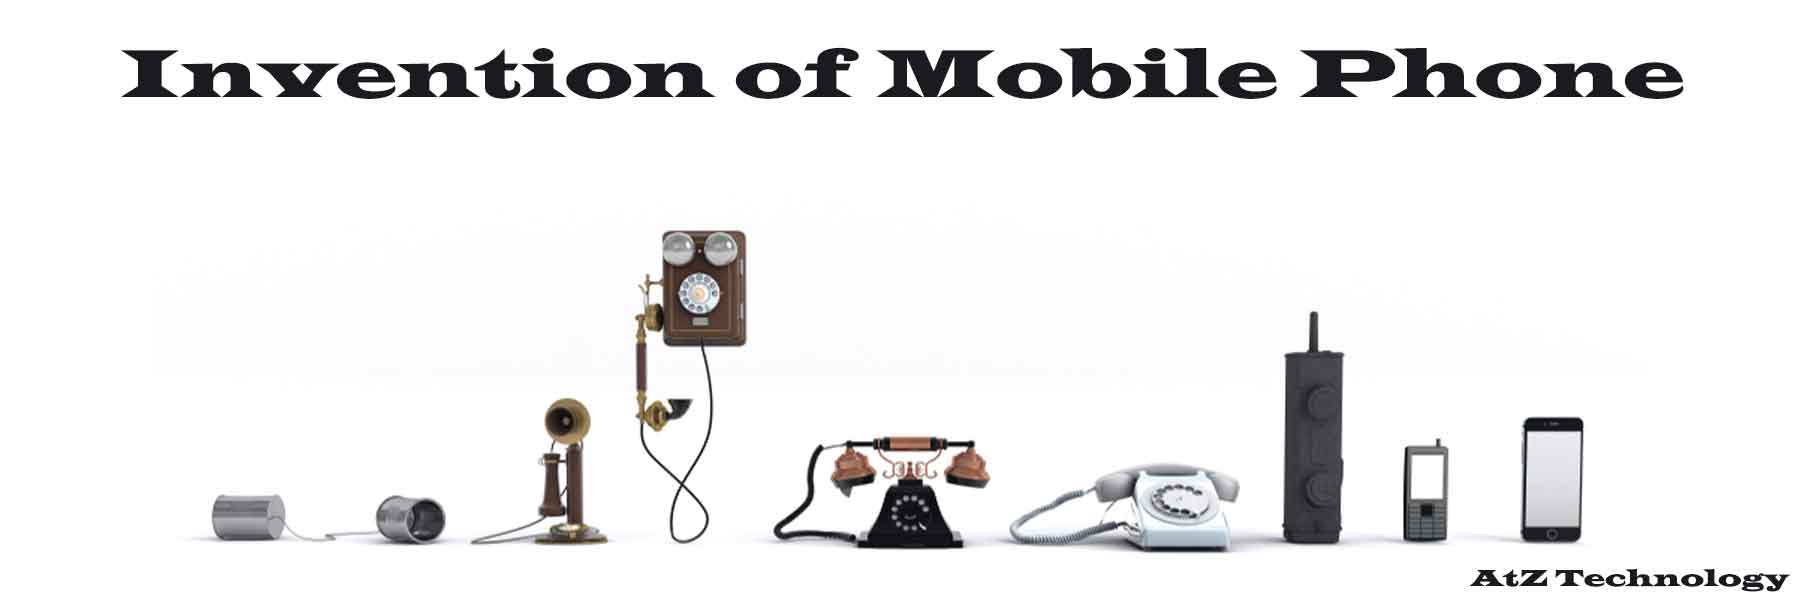 Invention of Mobile Phone